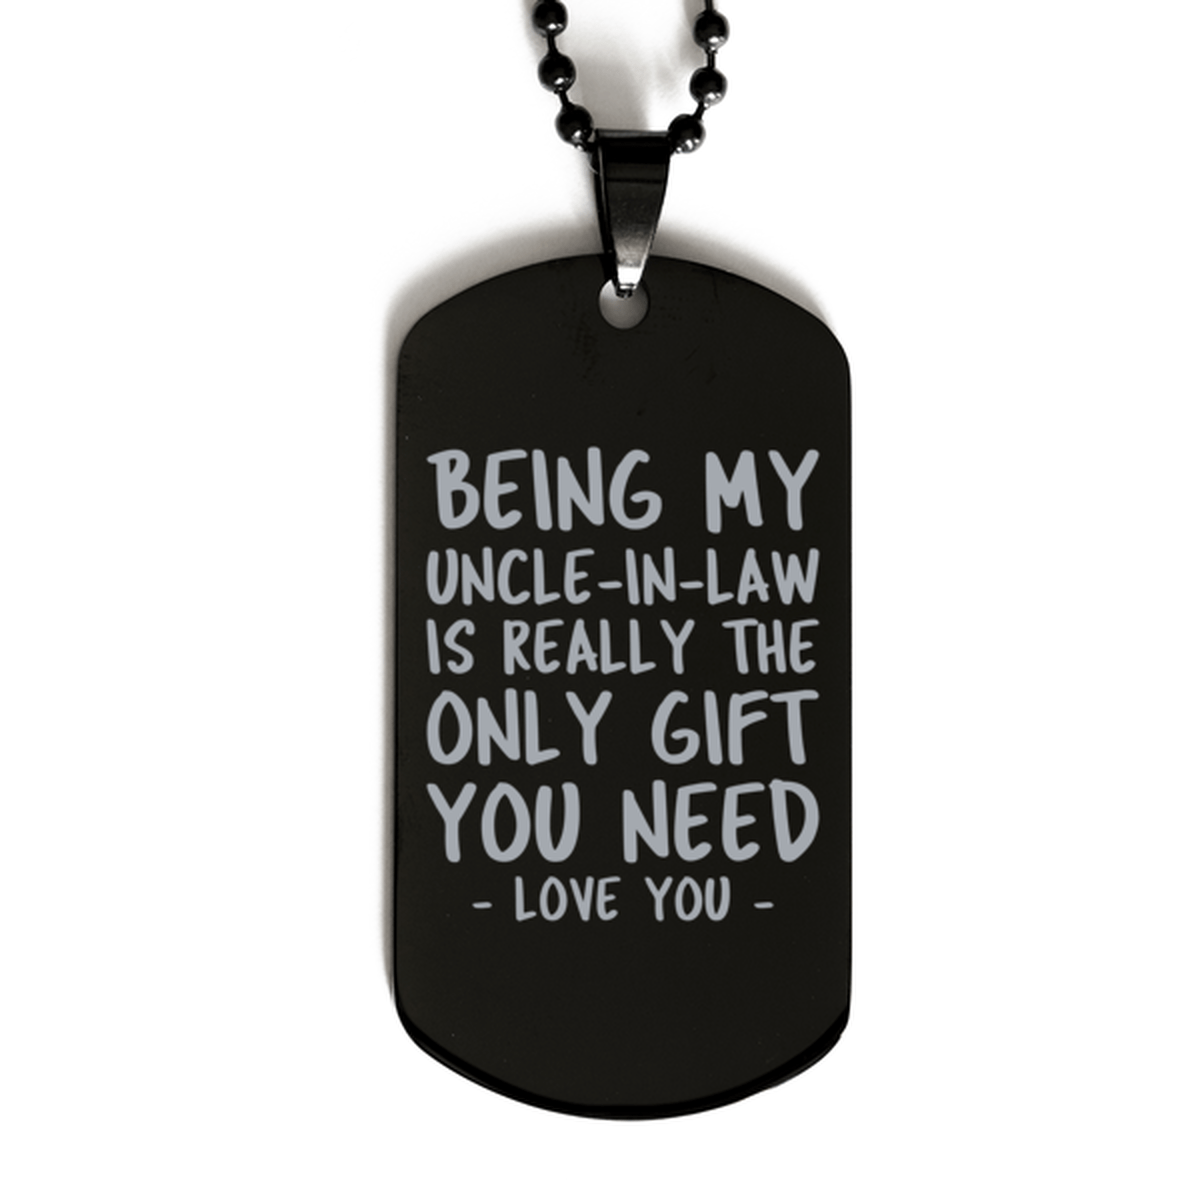 Funny Uncle-in-law Black Dog Tag Necklace, Being My Uncle-in-law Is Really the Only Gift You Need, Best Birthday Gifts for Uncle-in-law